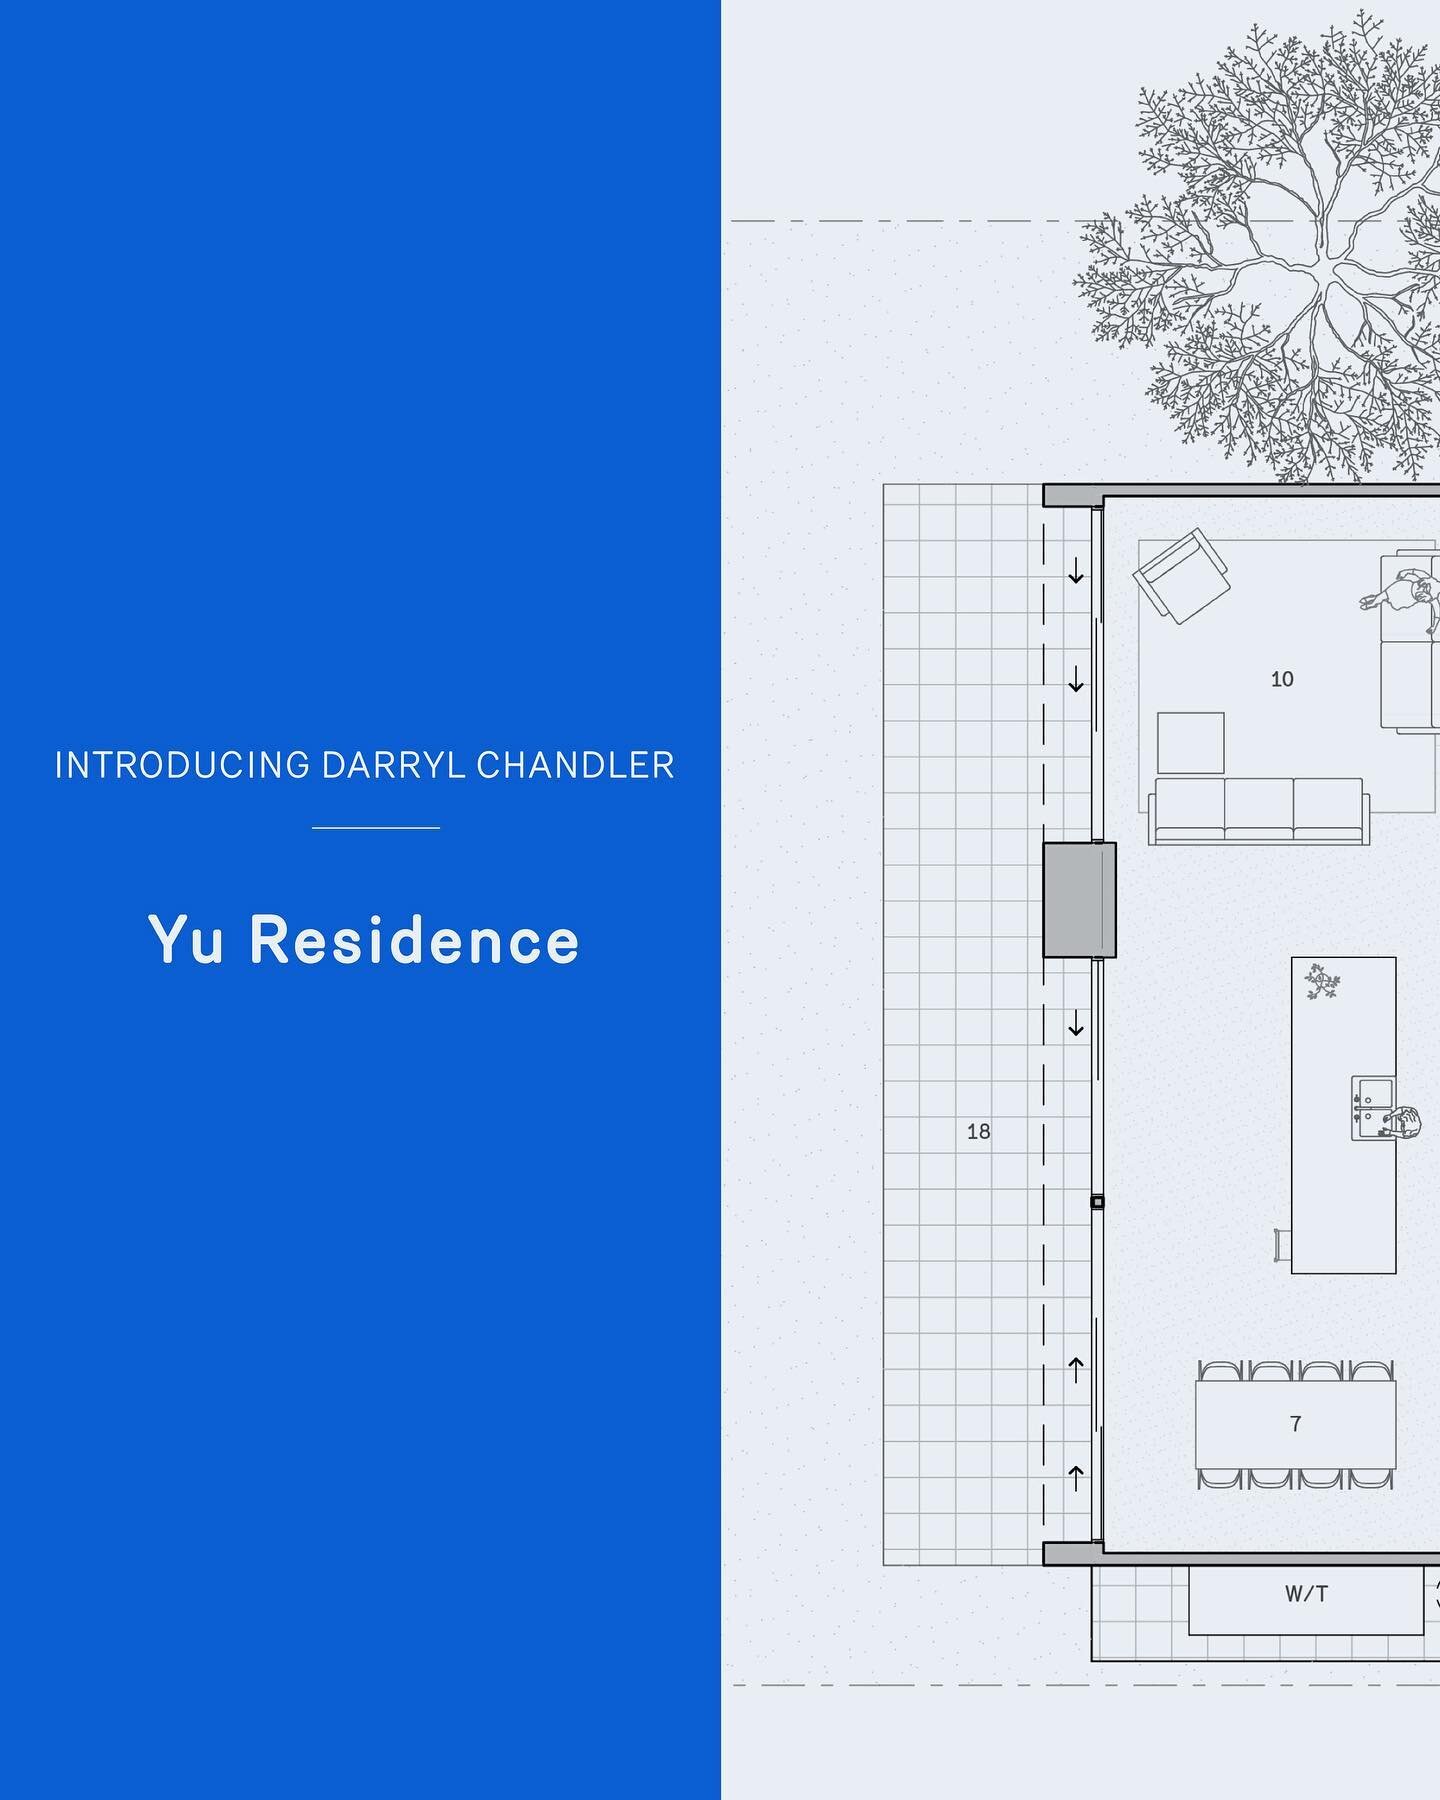 Introducing Darryl Chandler.
We asked Darryl to share a project he designed in Australia: This is Yu Residence.
 
Nestled into a leafy oak-lined street in Canberra, Yu Residence was designed for generational occupation. The ground floor is a comforta